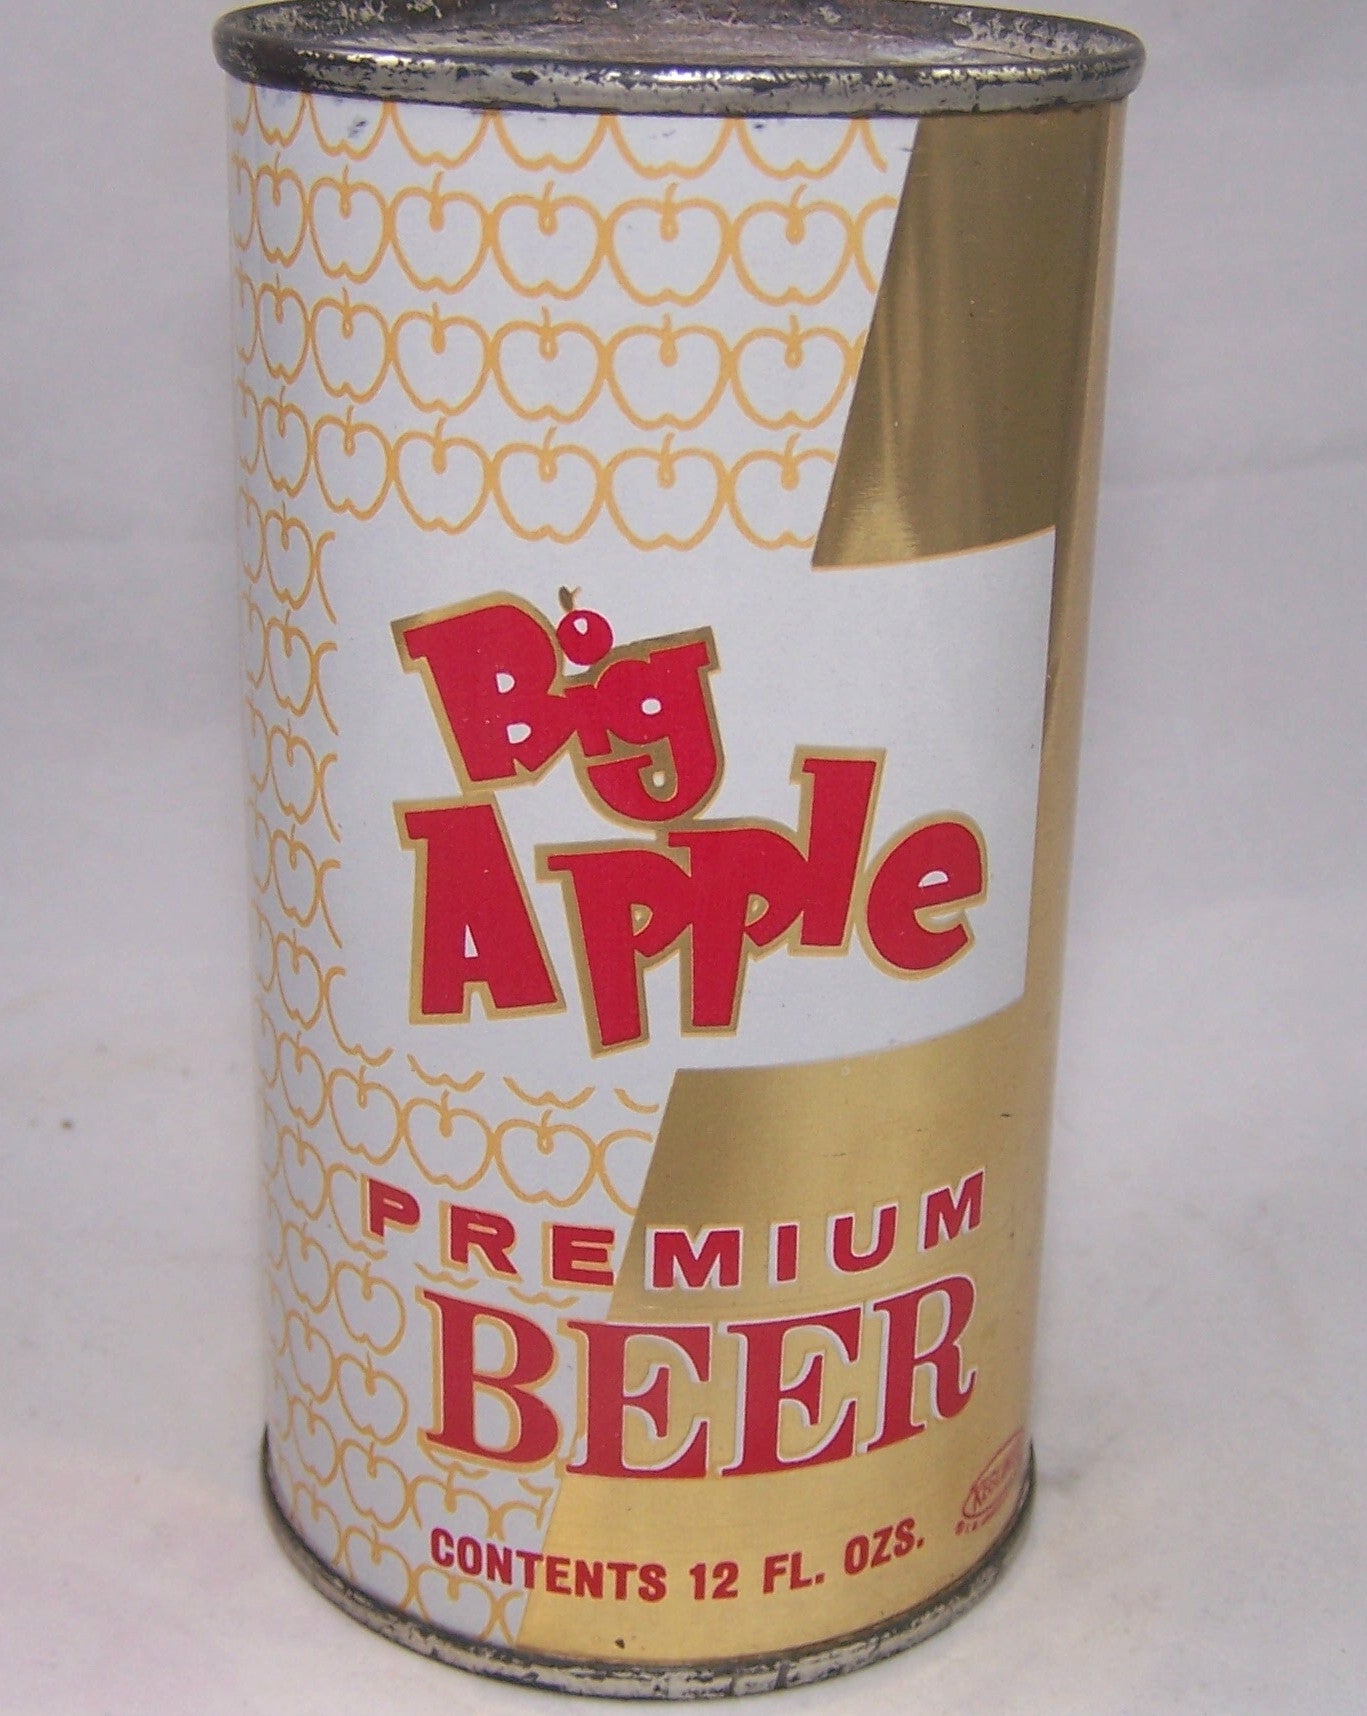 Big Apple Premium Beer, USBC 37-04 Grade 1/1+ one side, Grade 1- the other side. Sold on 08/31/18